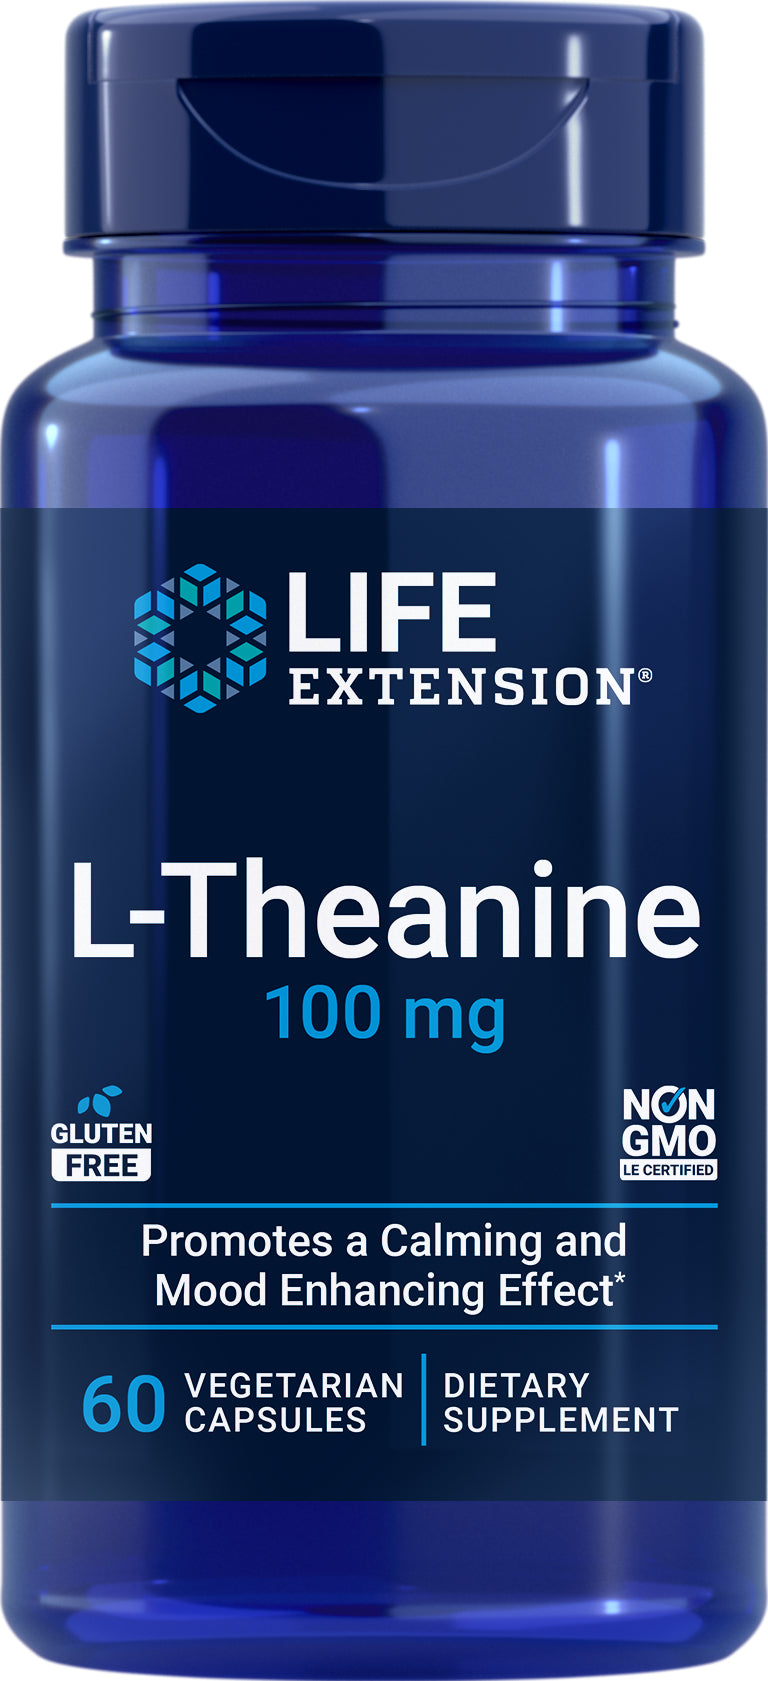 L-Theanine 100 mg, 60 vegetarian capsules by Life Extension